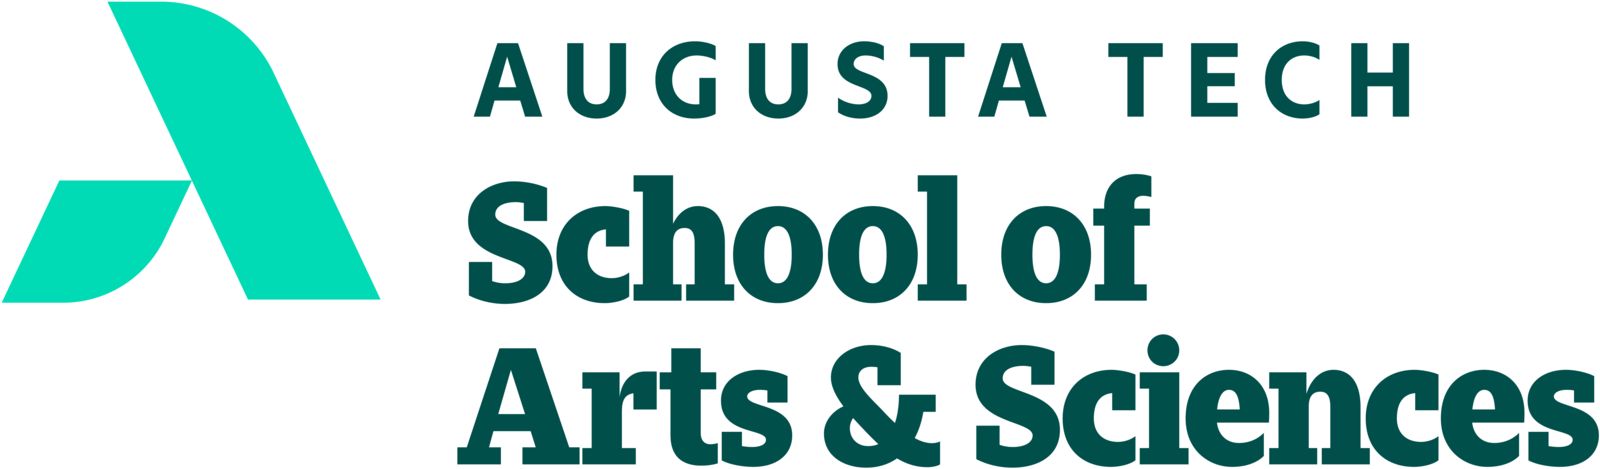 An uppercase abstract A in mint green composed of a smaller leg representing Augusta Technical College supporting the larger leg representing the Augusta Community and economy. The words Augusta Tech and School of Arts & Sciences are in heritage green font to the right of the a, stacked in three horizontal rows with School of Arts & Sciences in bold font.